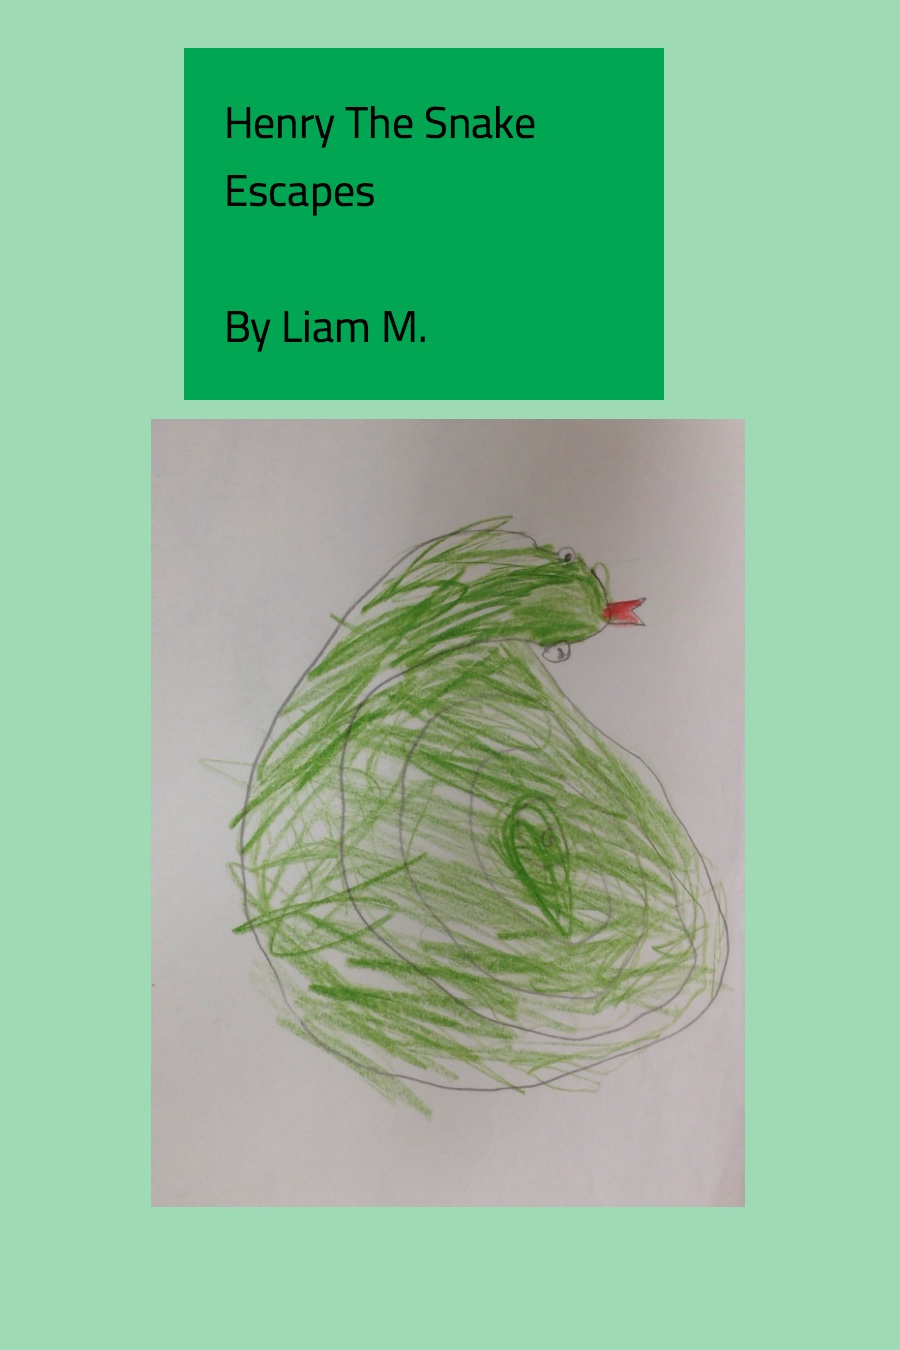 Henry the Snake Escapes by Liam M